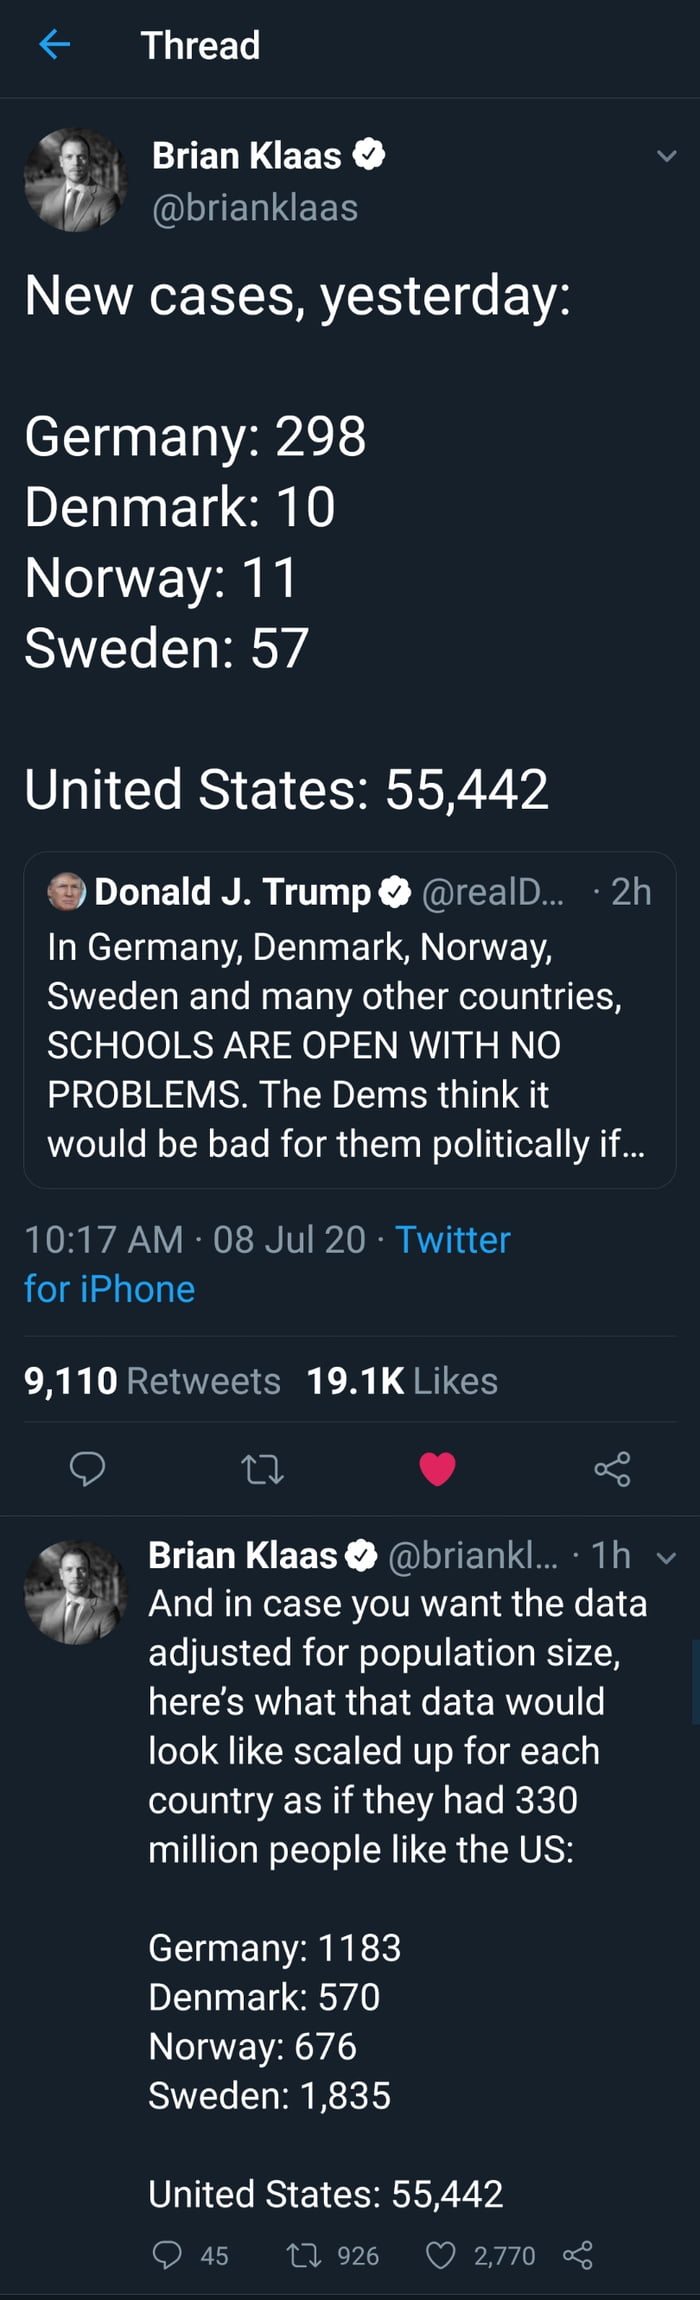 *this* is why those countries are reopening schools